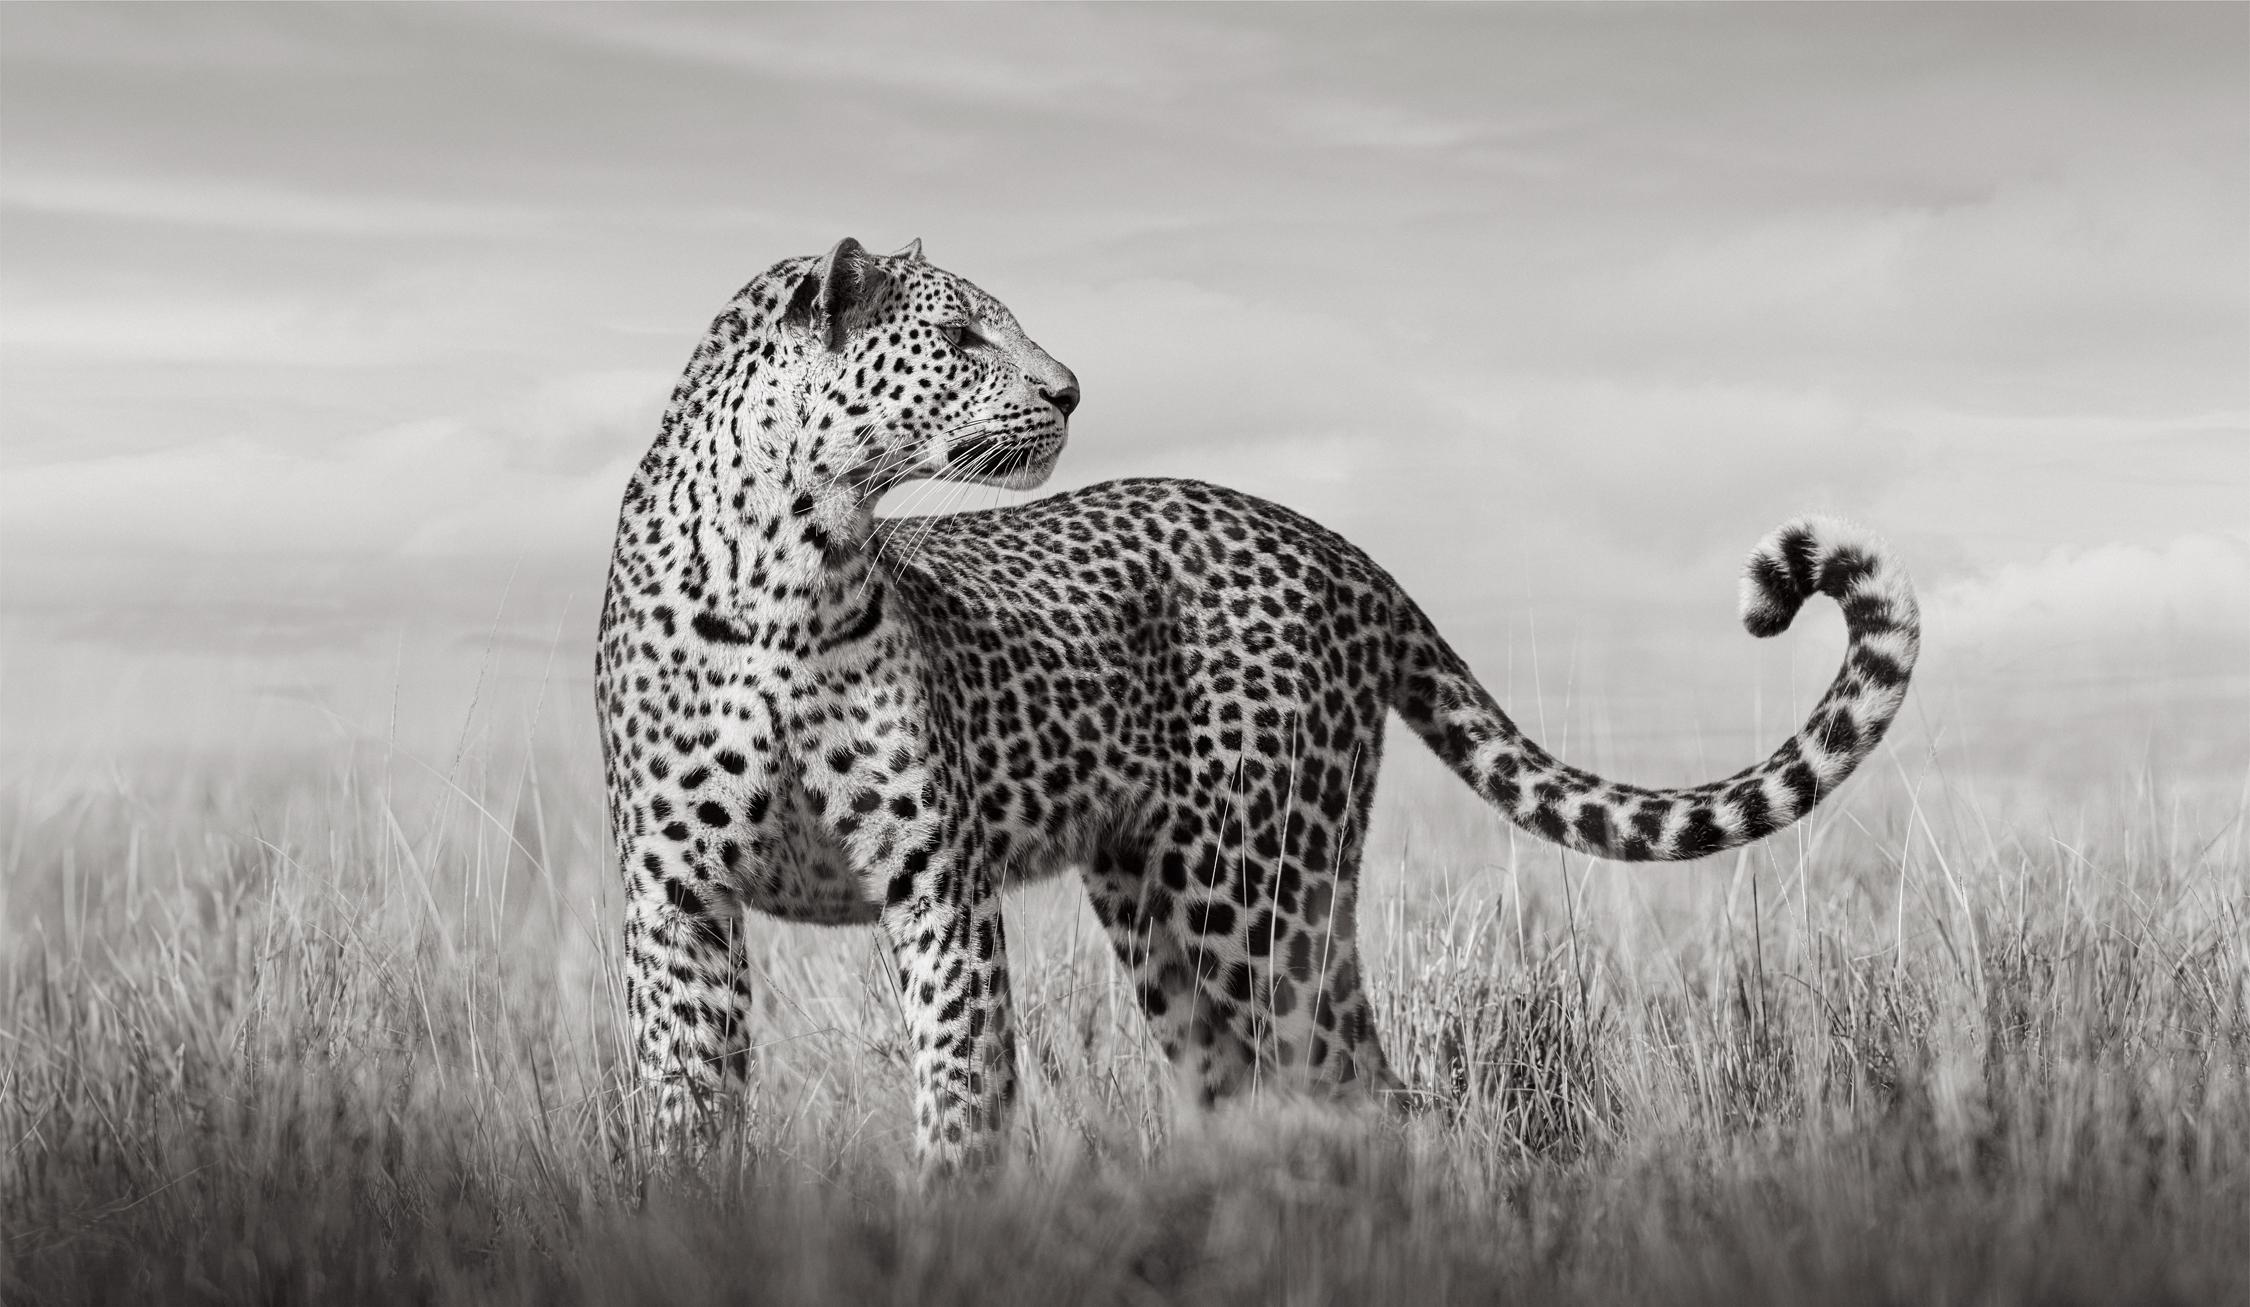 Drew Doggett Black and White Photograph - A leopard stands in the tall grass of Kenya looking at something out of sight